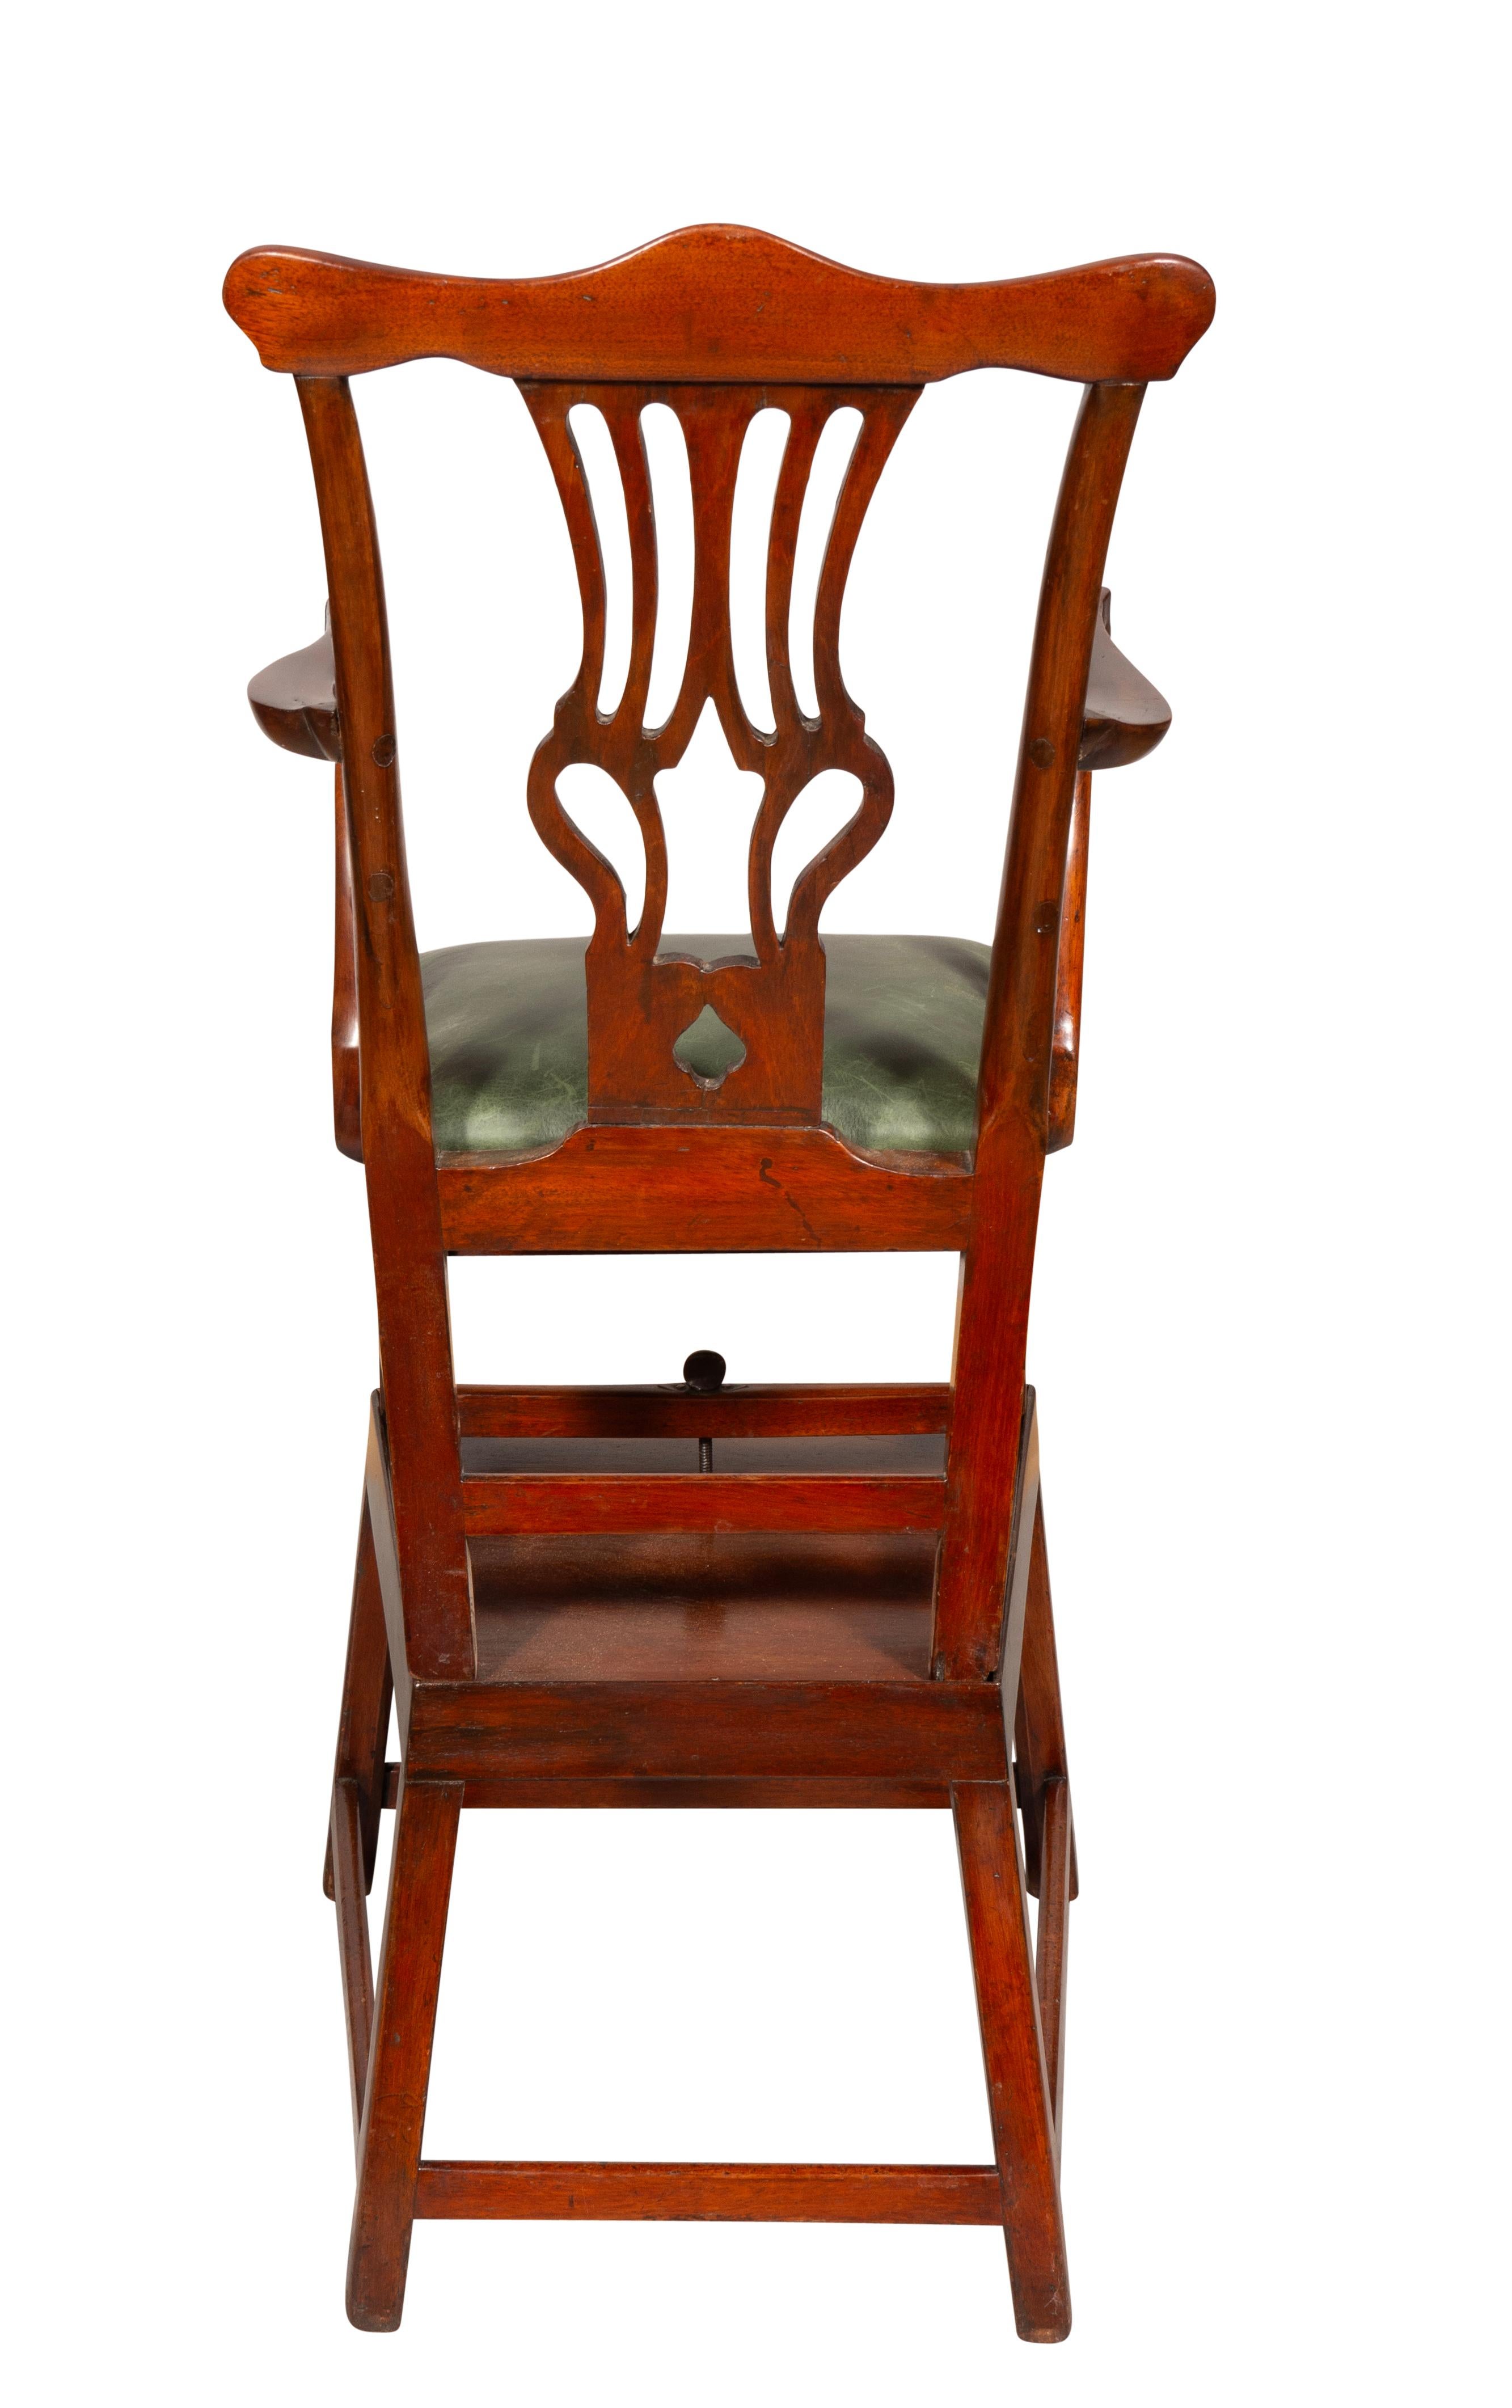 George III Mahogany Childs High Chair In Good Condition For Sale In Essex, MA